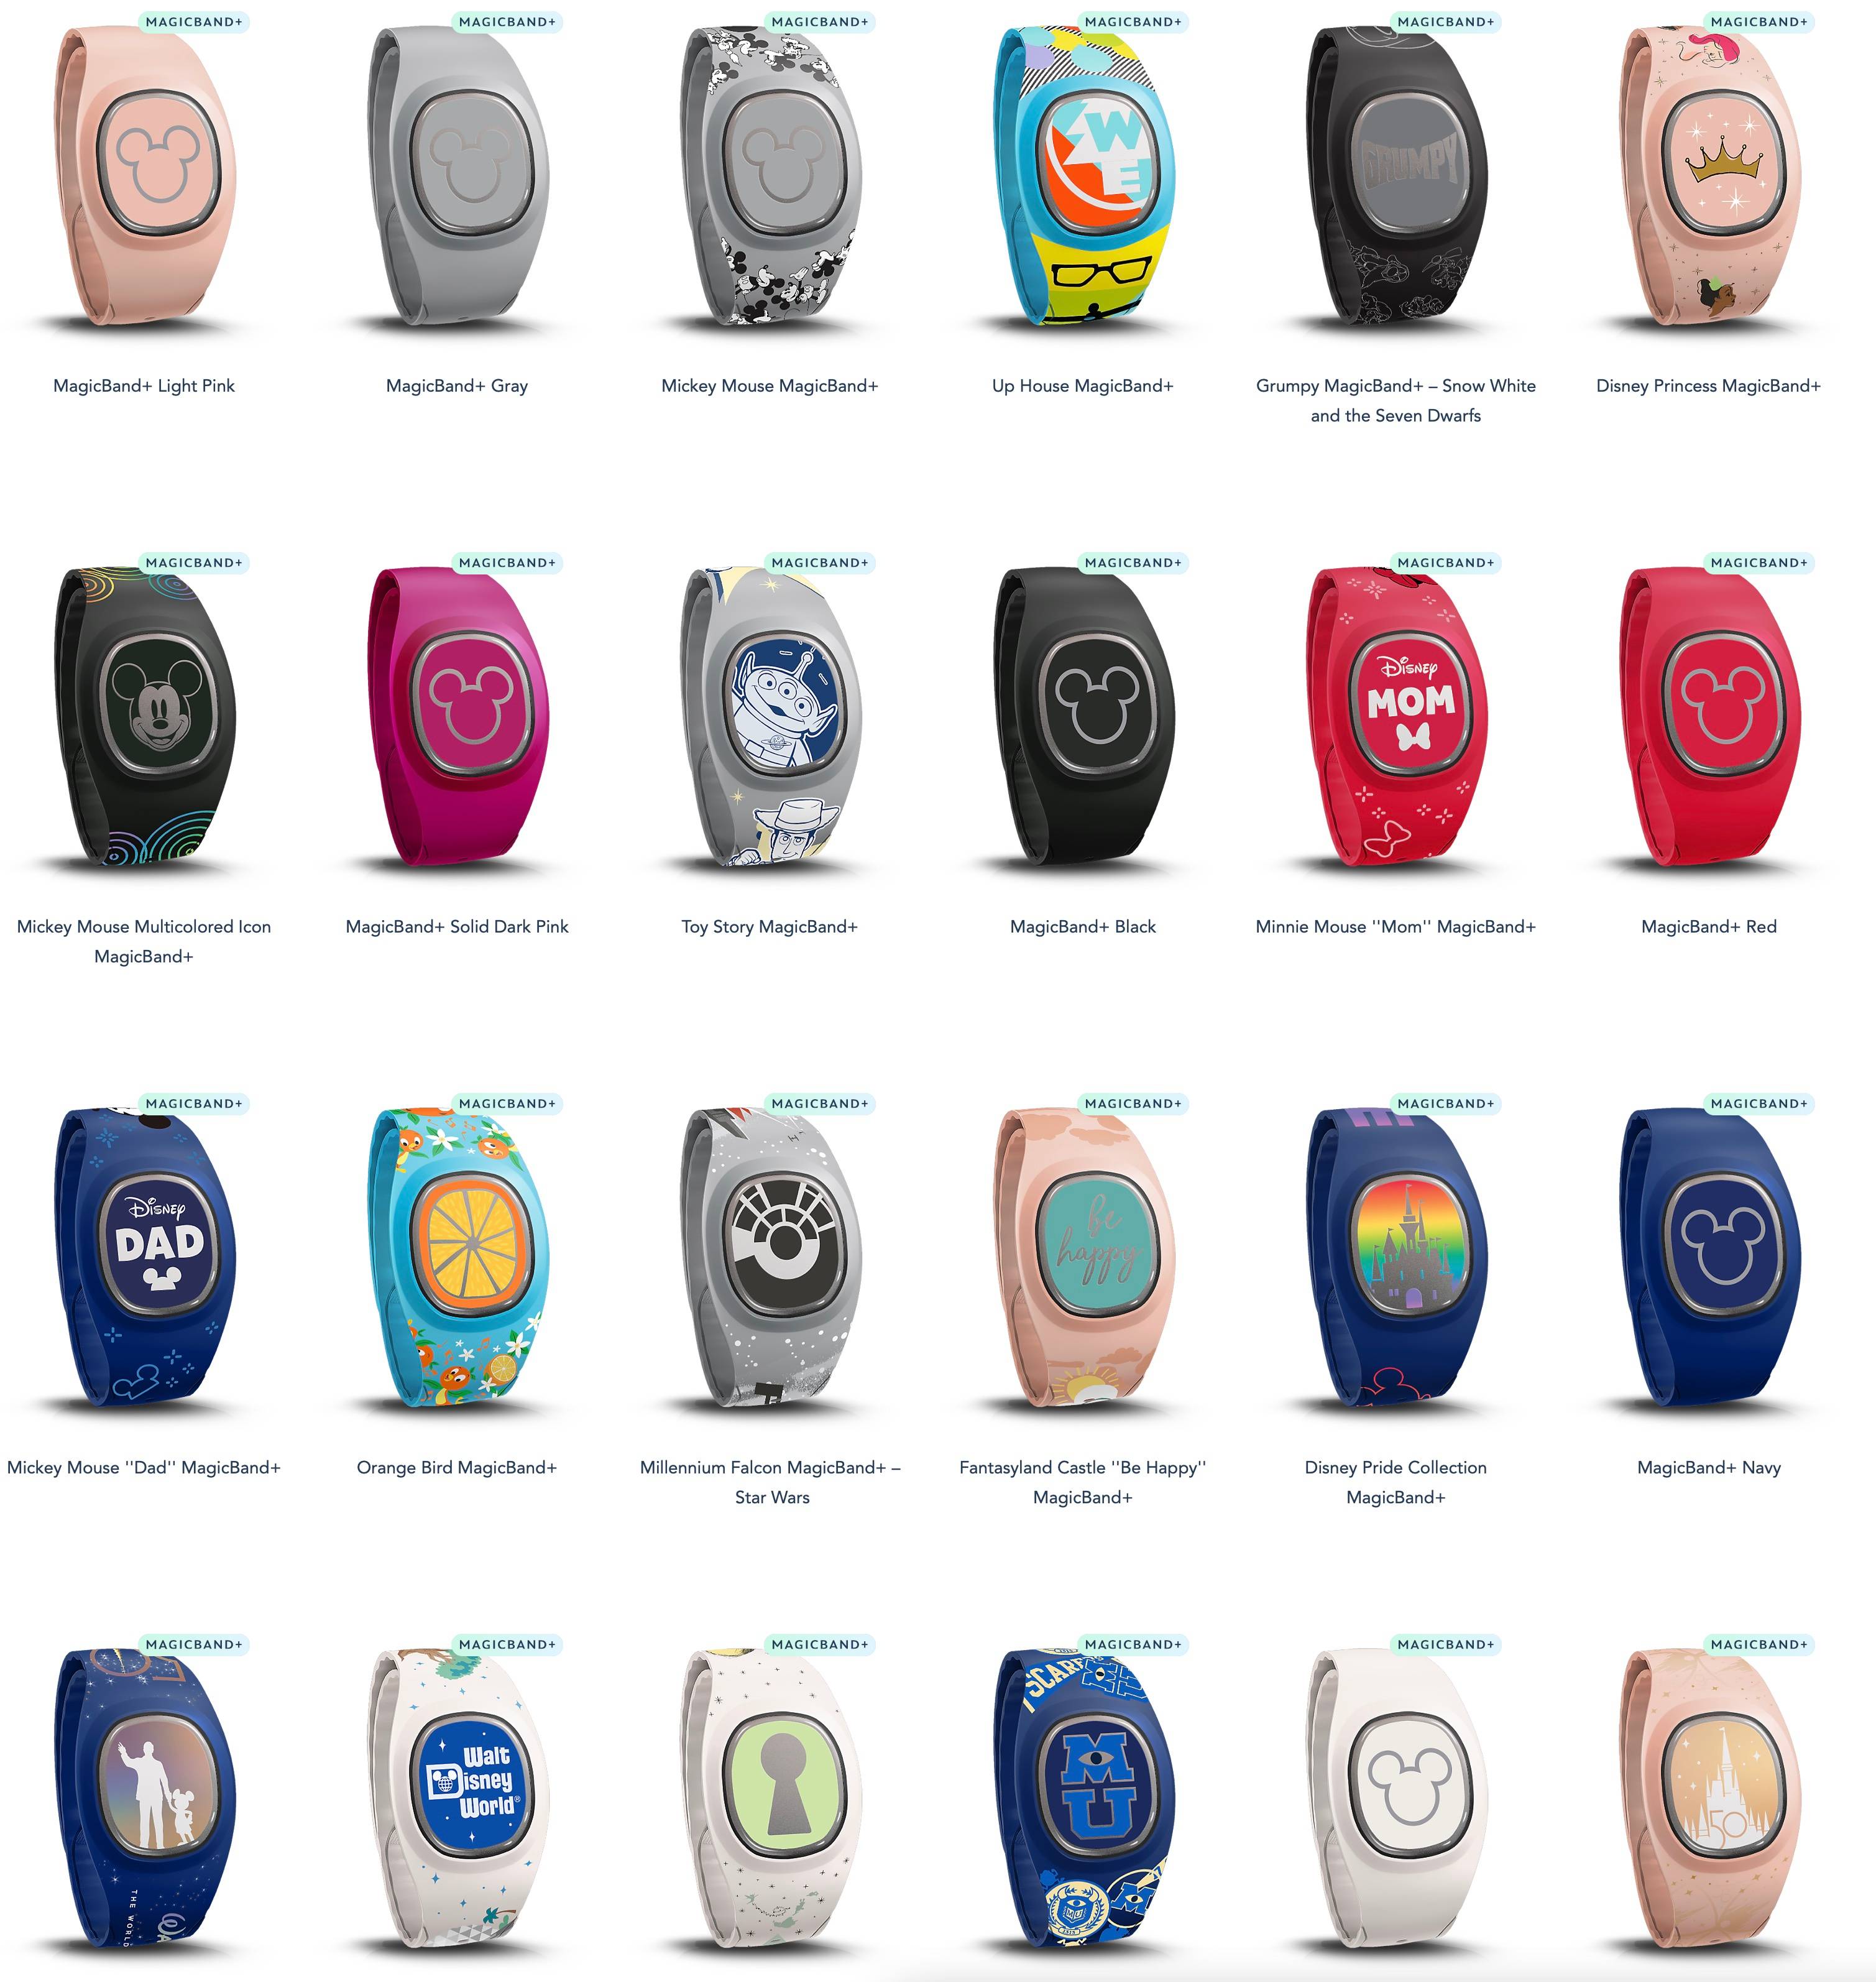  DisneyParks Magicband 2.0 - Link It Later - White